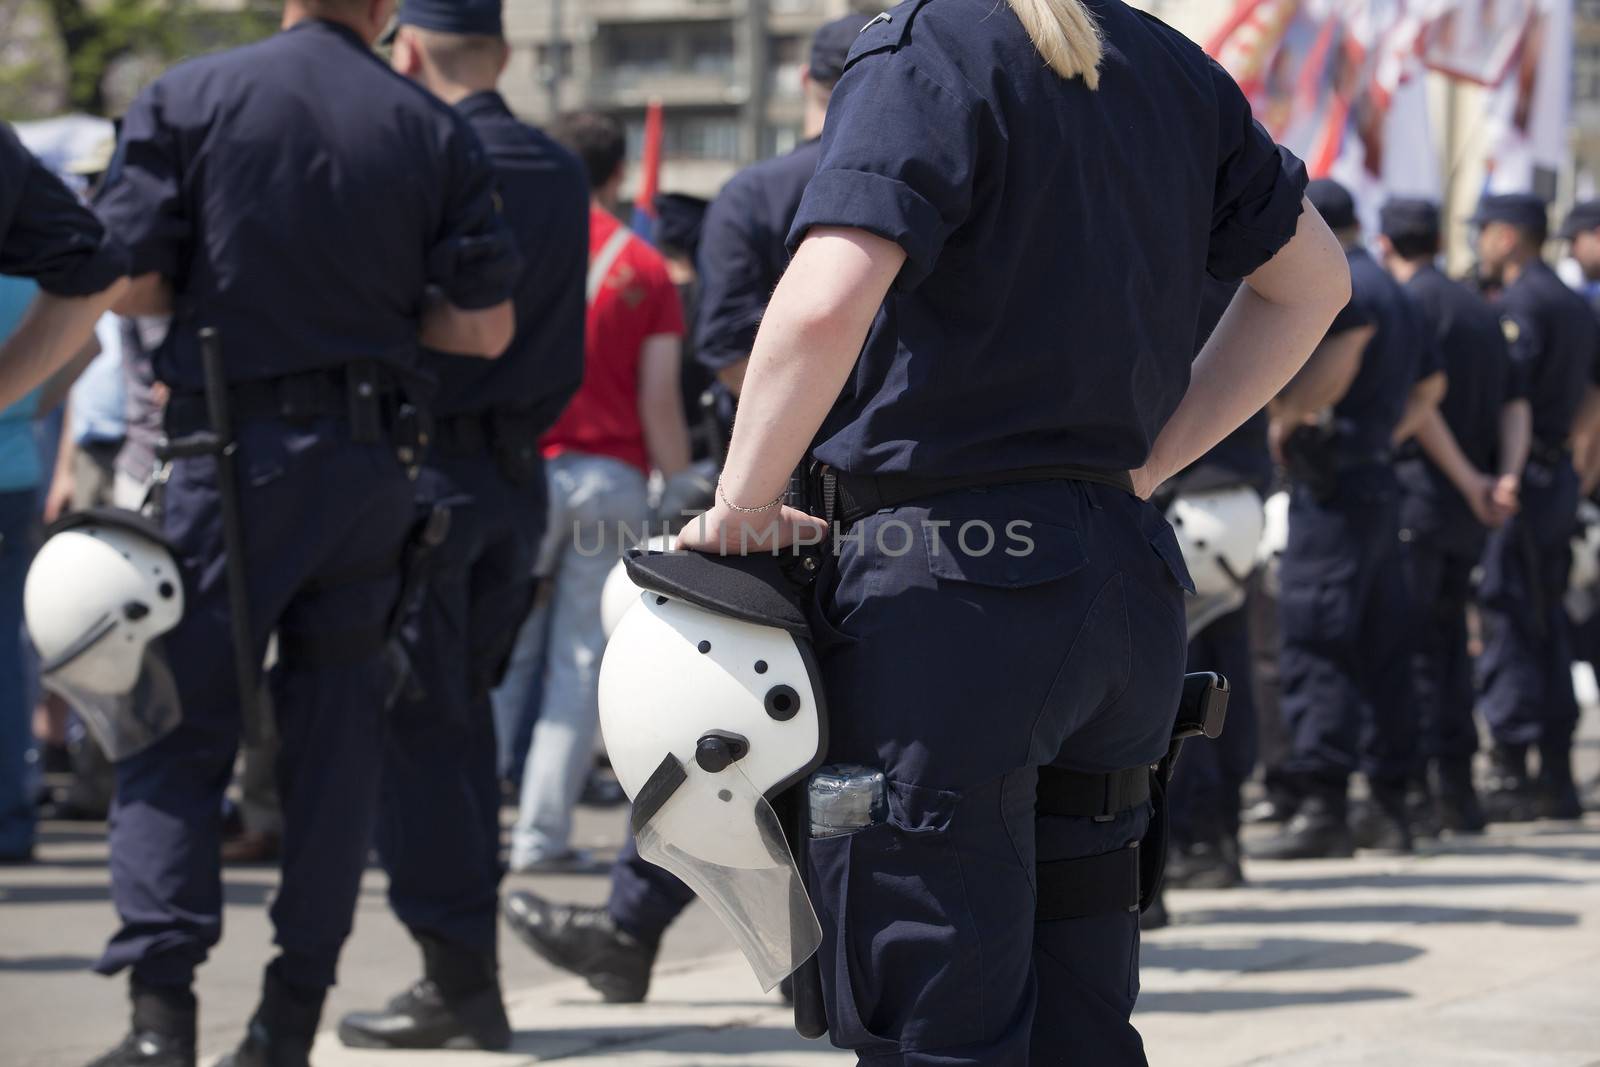 Riot police by wellphoto